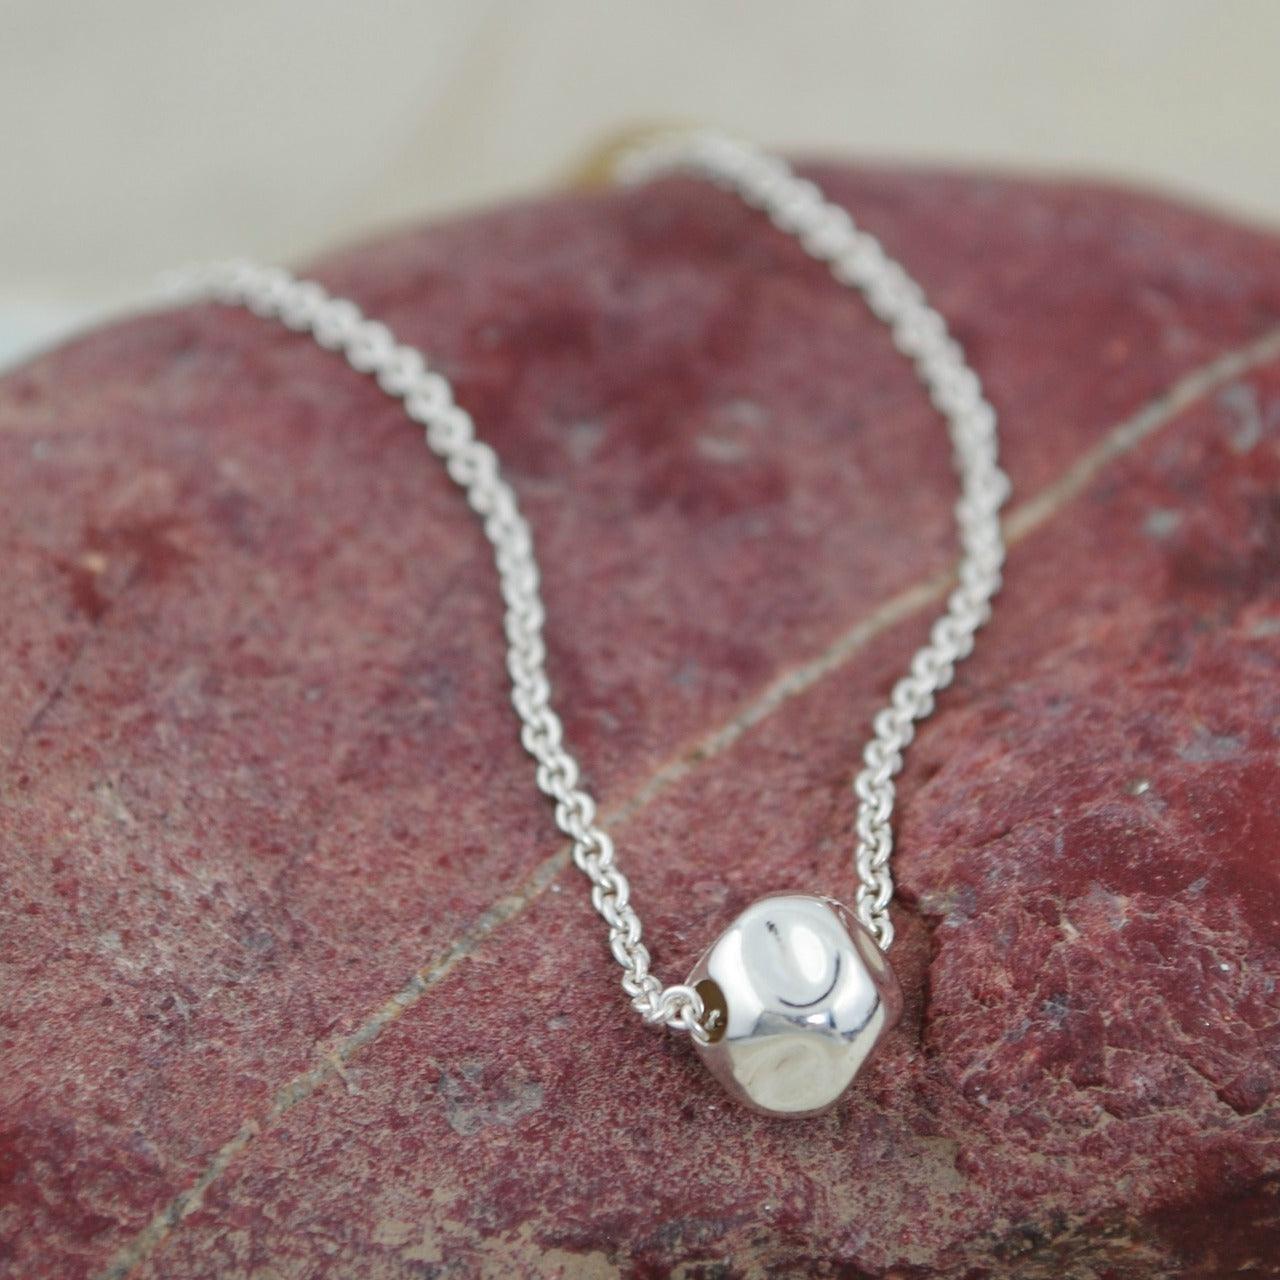 .925 sterling silver hammered bead necklace